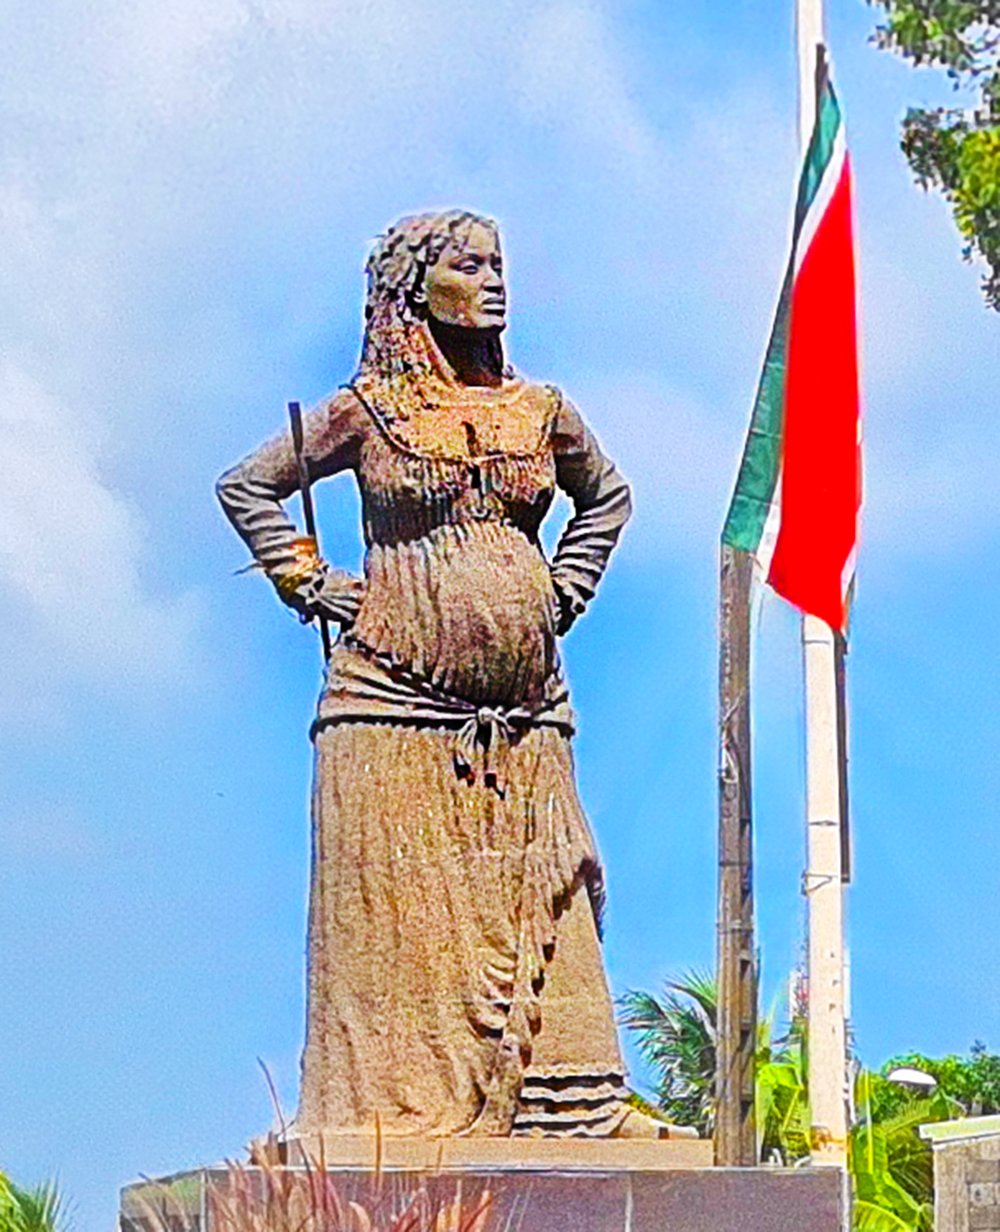 A statue of Mulatresse Solitude on a pedestal next to a flagpole with a flag of Guadeloupe. She is pregnant and is wearing a dress.